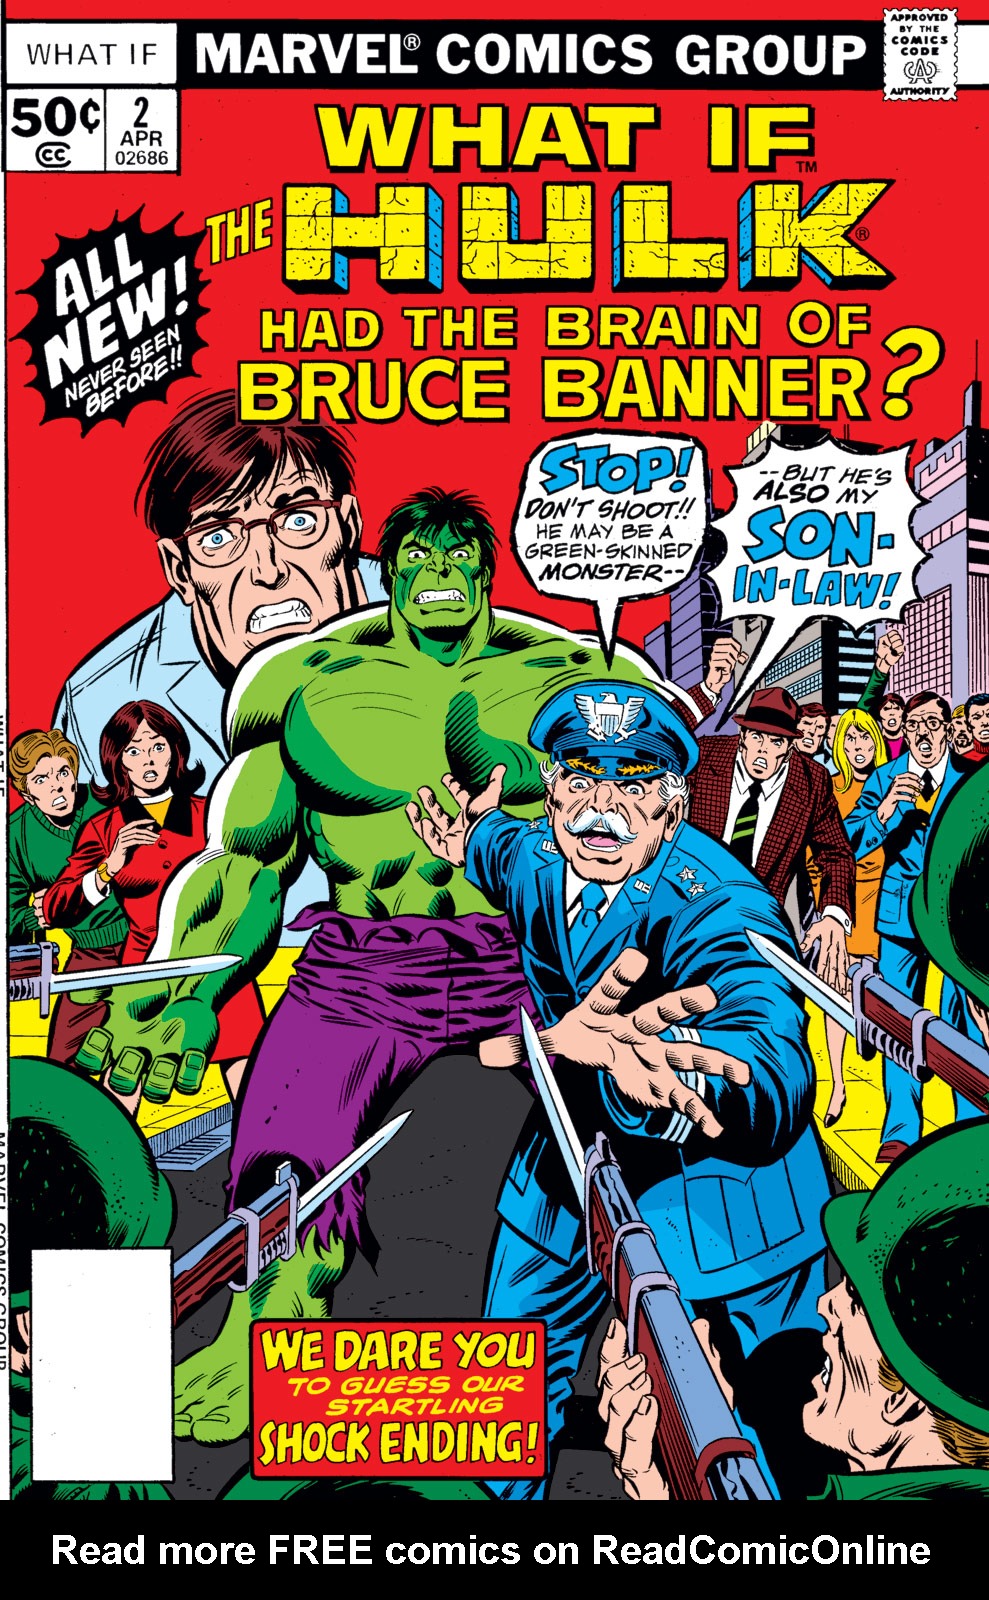 What If? (1977) issue 2 - The Hulk had the brain of Bruce Banner - Page 1